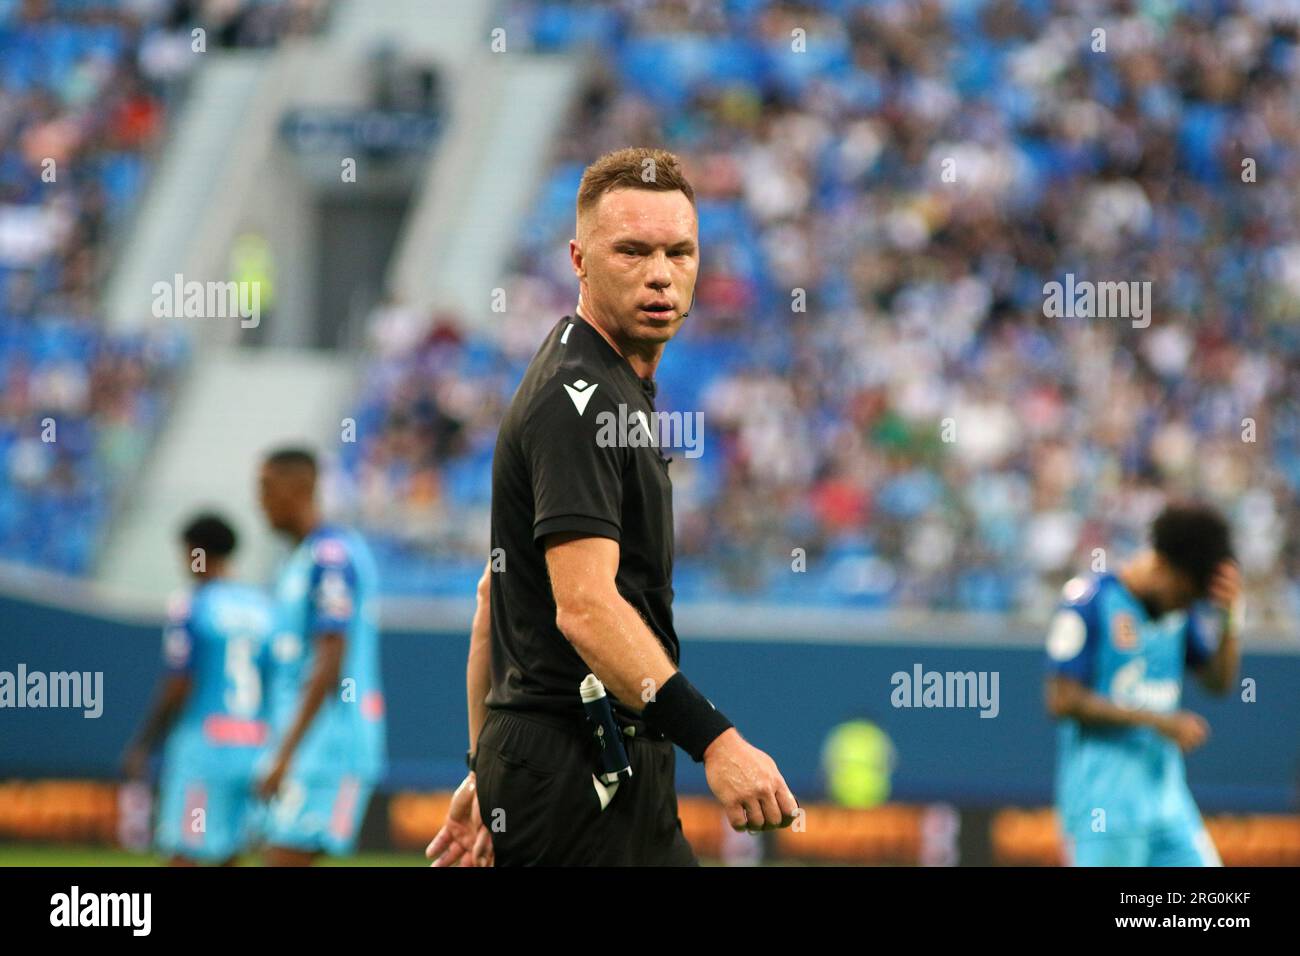 Saint Petersburg, Russia. 06th Aug, 2023. Aleksey Amelin, chief judge seen during the Russian Premier League football match between Zenit Saint Petersburg and Dynamo Moscow at Gazprom Arena. Zenit 2:3 Dynamo. Credit: SOPA Images Limited/Alamy Live News Stock Photo